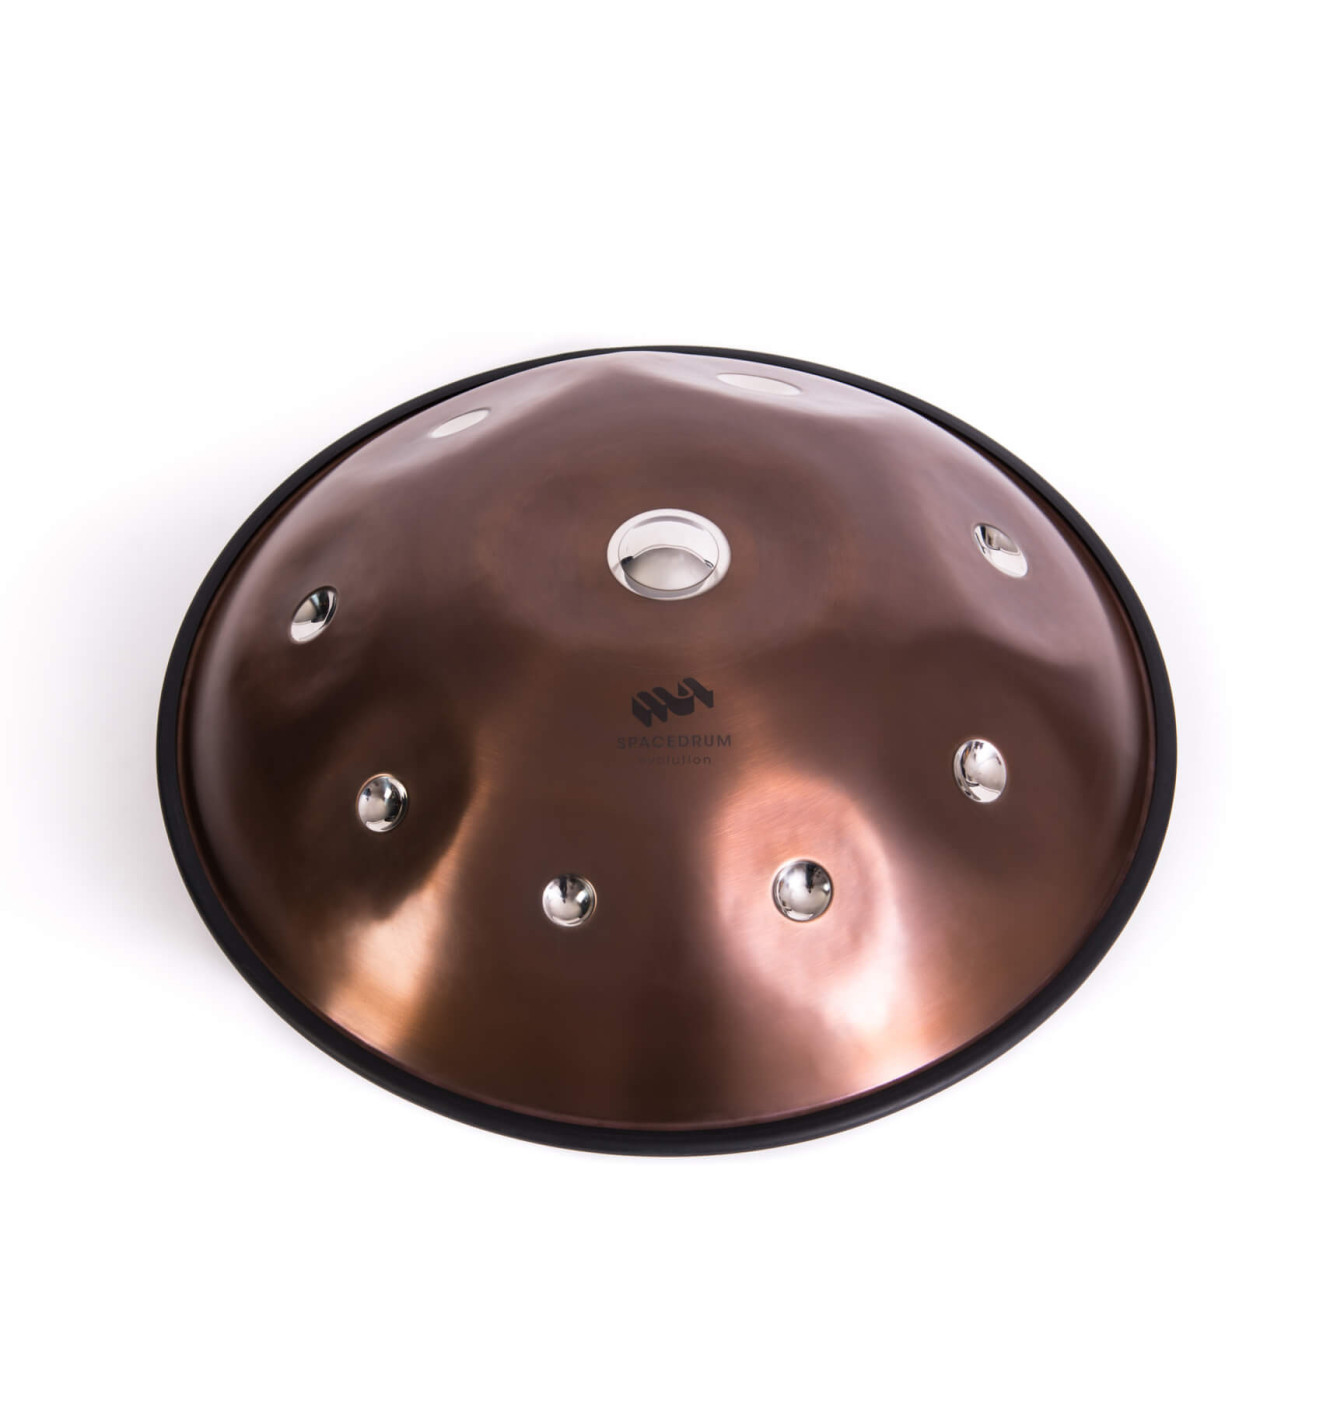 Hang drum for sale - Equinox - E